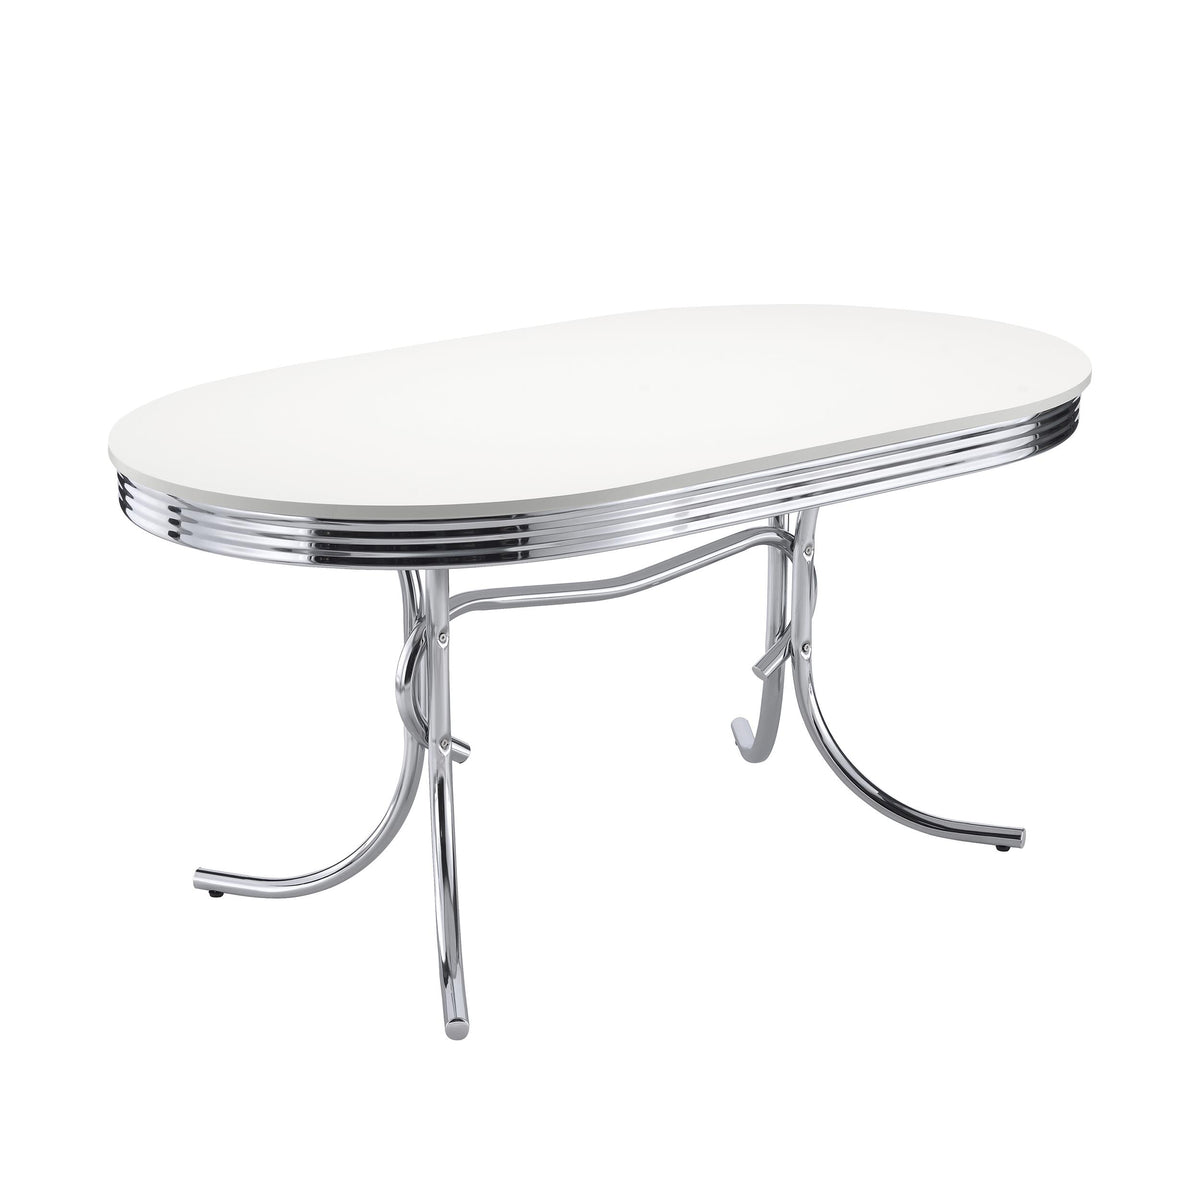 Retro Oval Dining Table Glossy White and Chrome  Las Vegas Furniture Stores